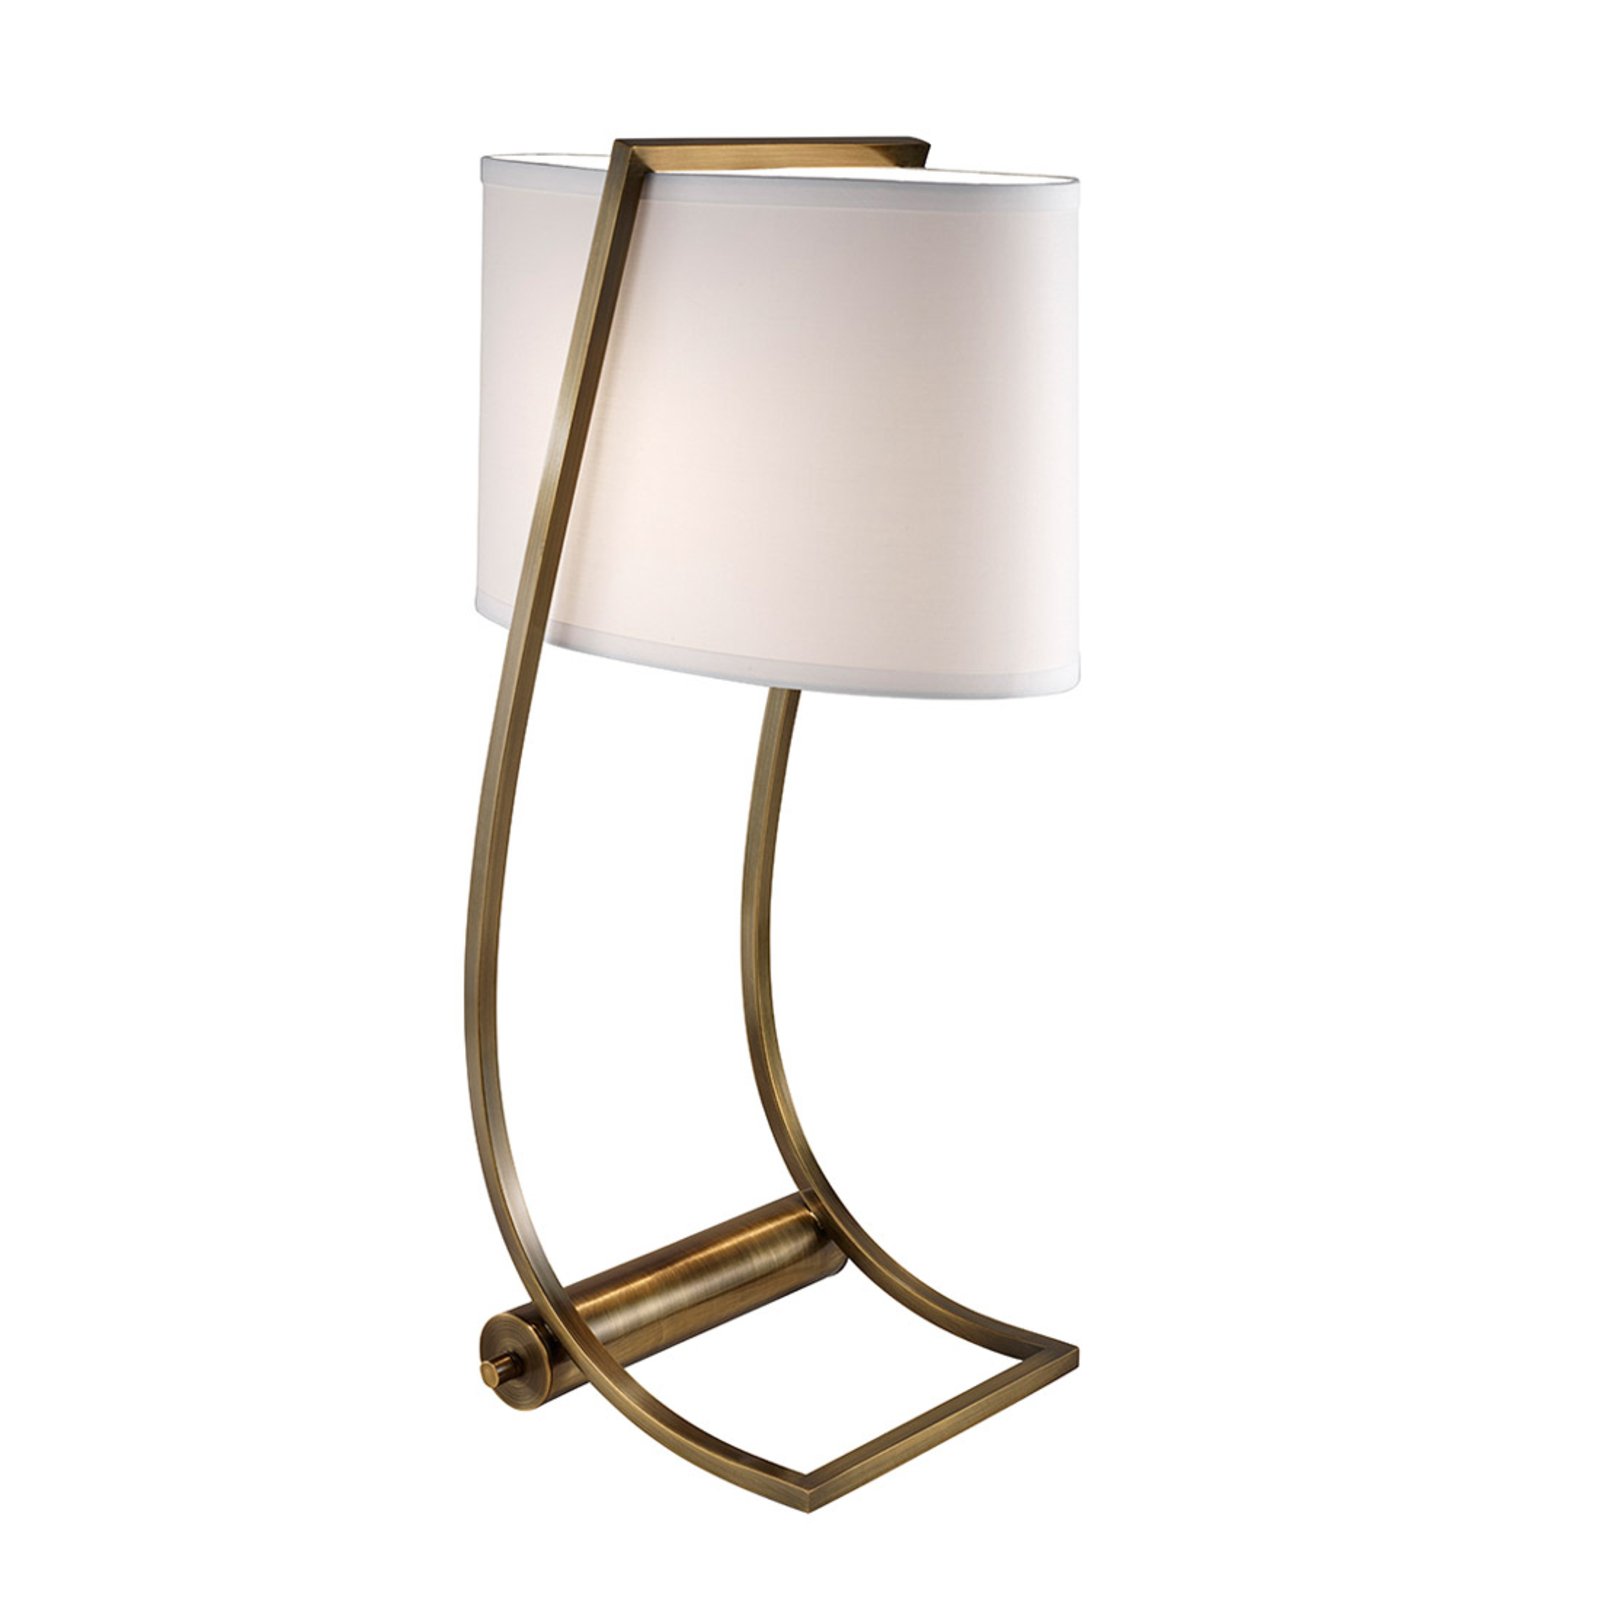 With USB port - fabric table lamp Lex brass